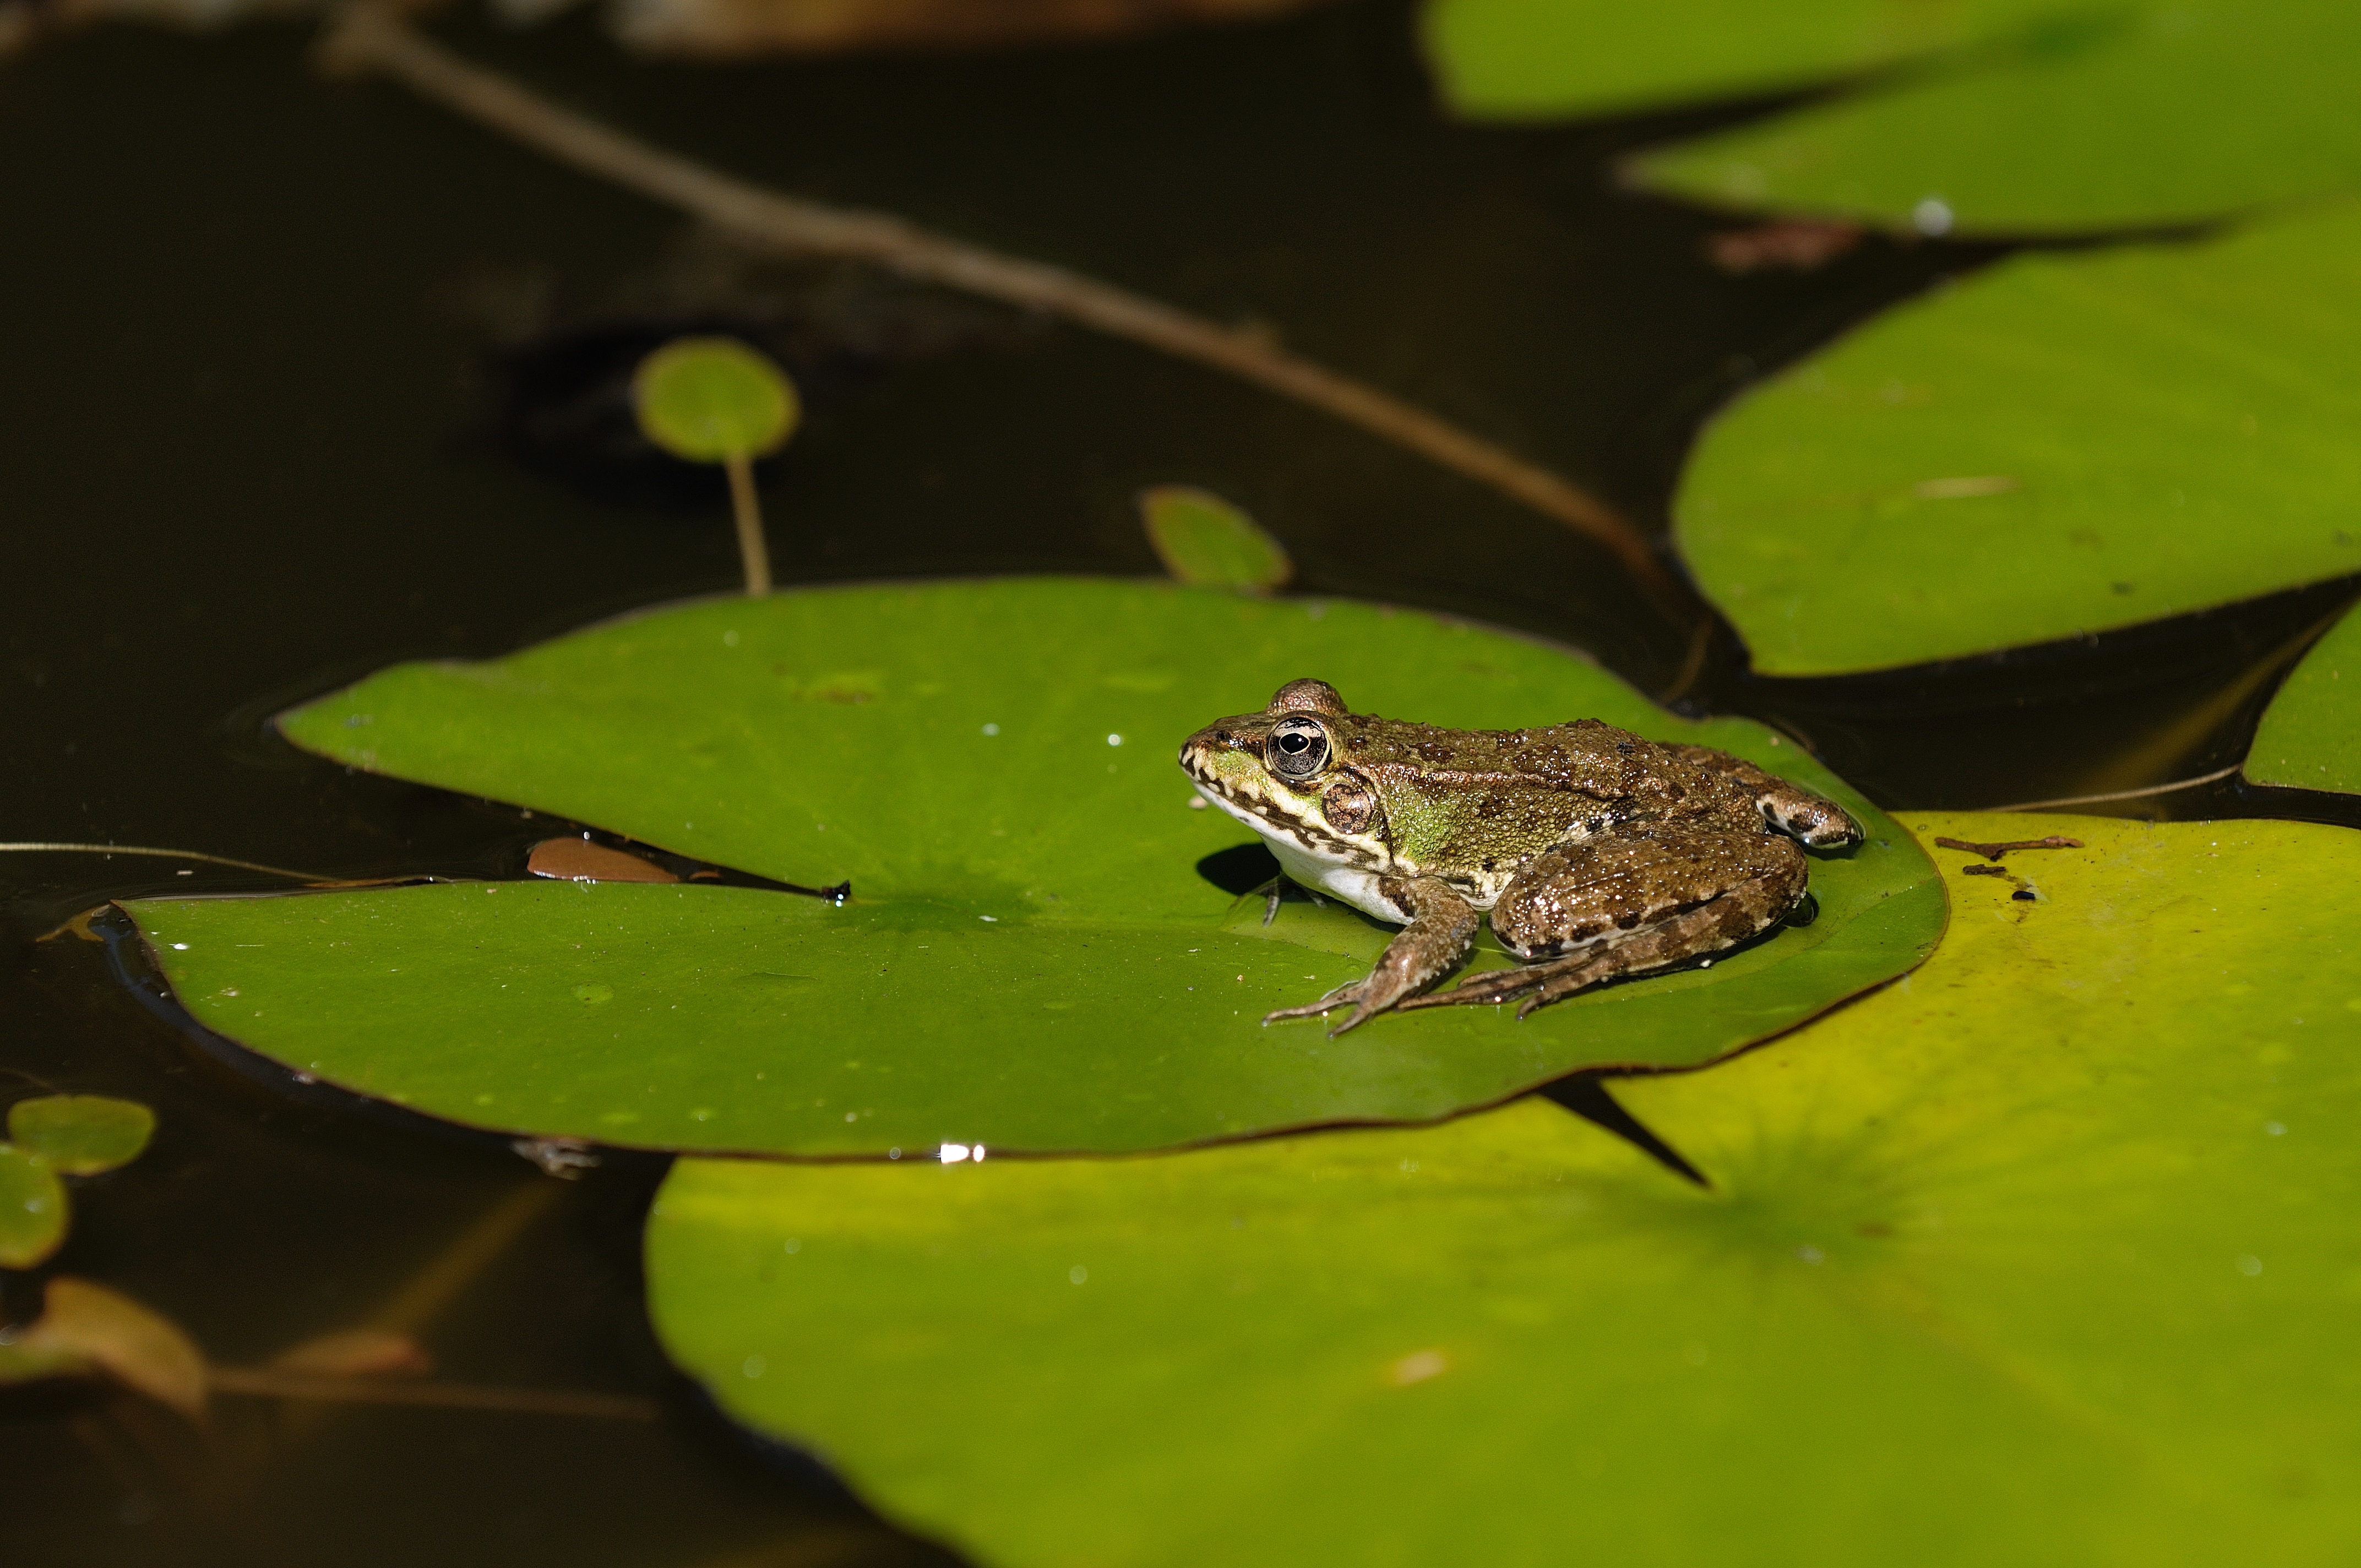 Frog in a lily pond by kalle2709